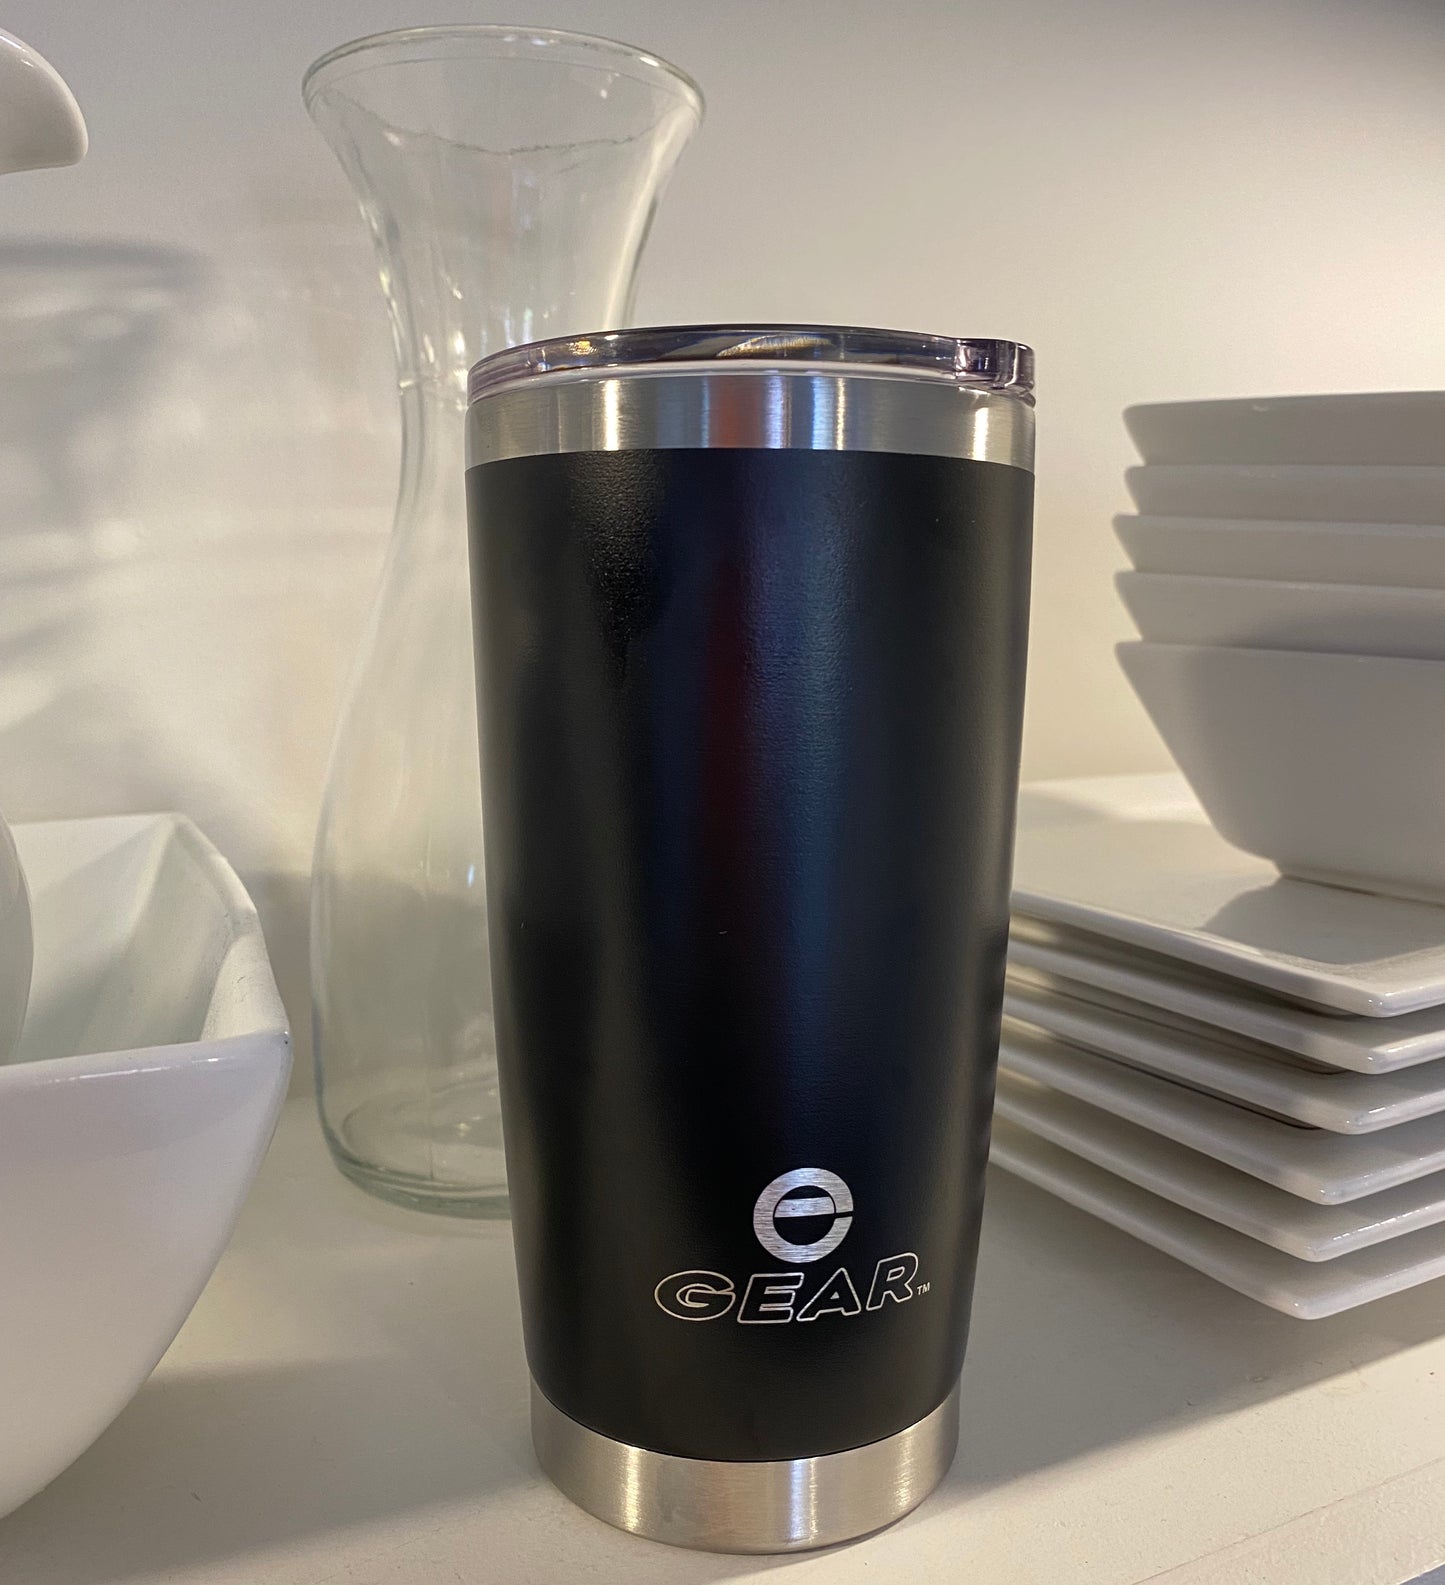 Enthusiast Gear 20 oz Tumbler with Magnetic Slider Lid, Stainless Steel, Vacuum Insulated for Hot and Cold Drinks